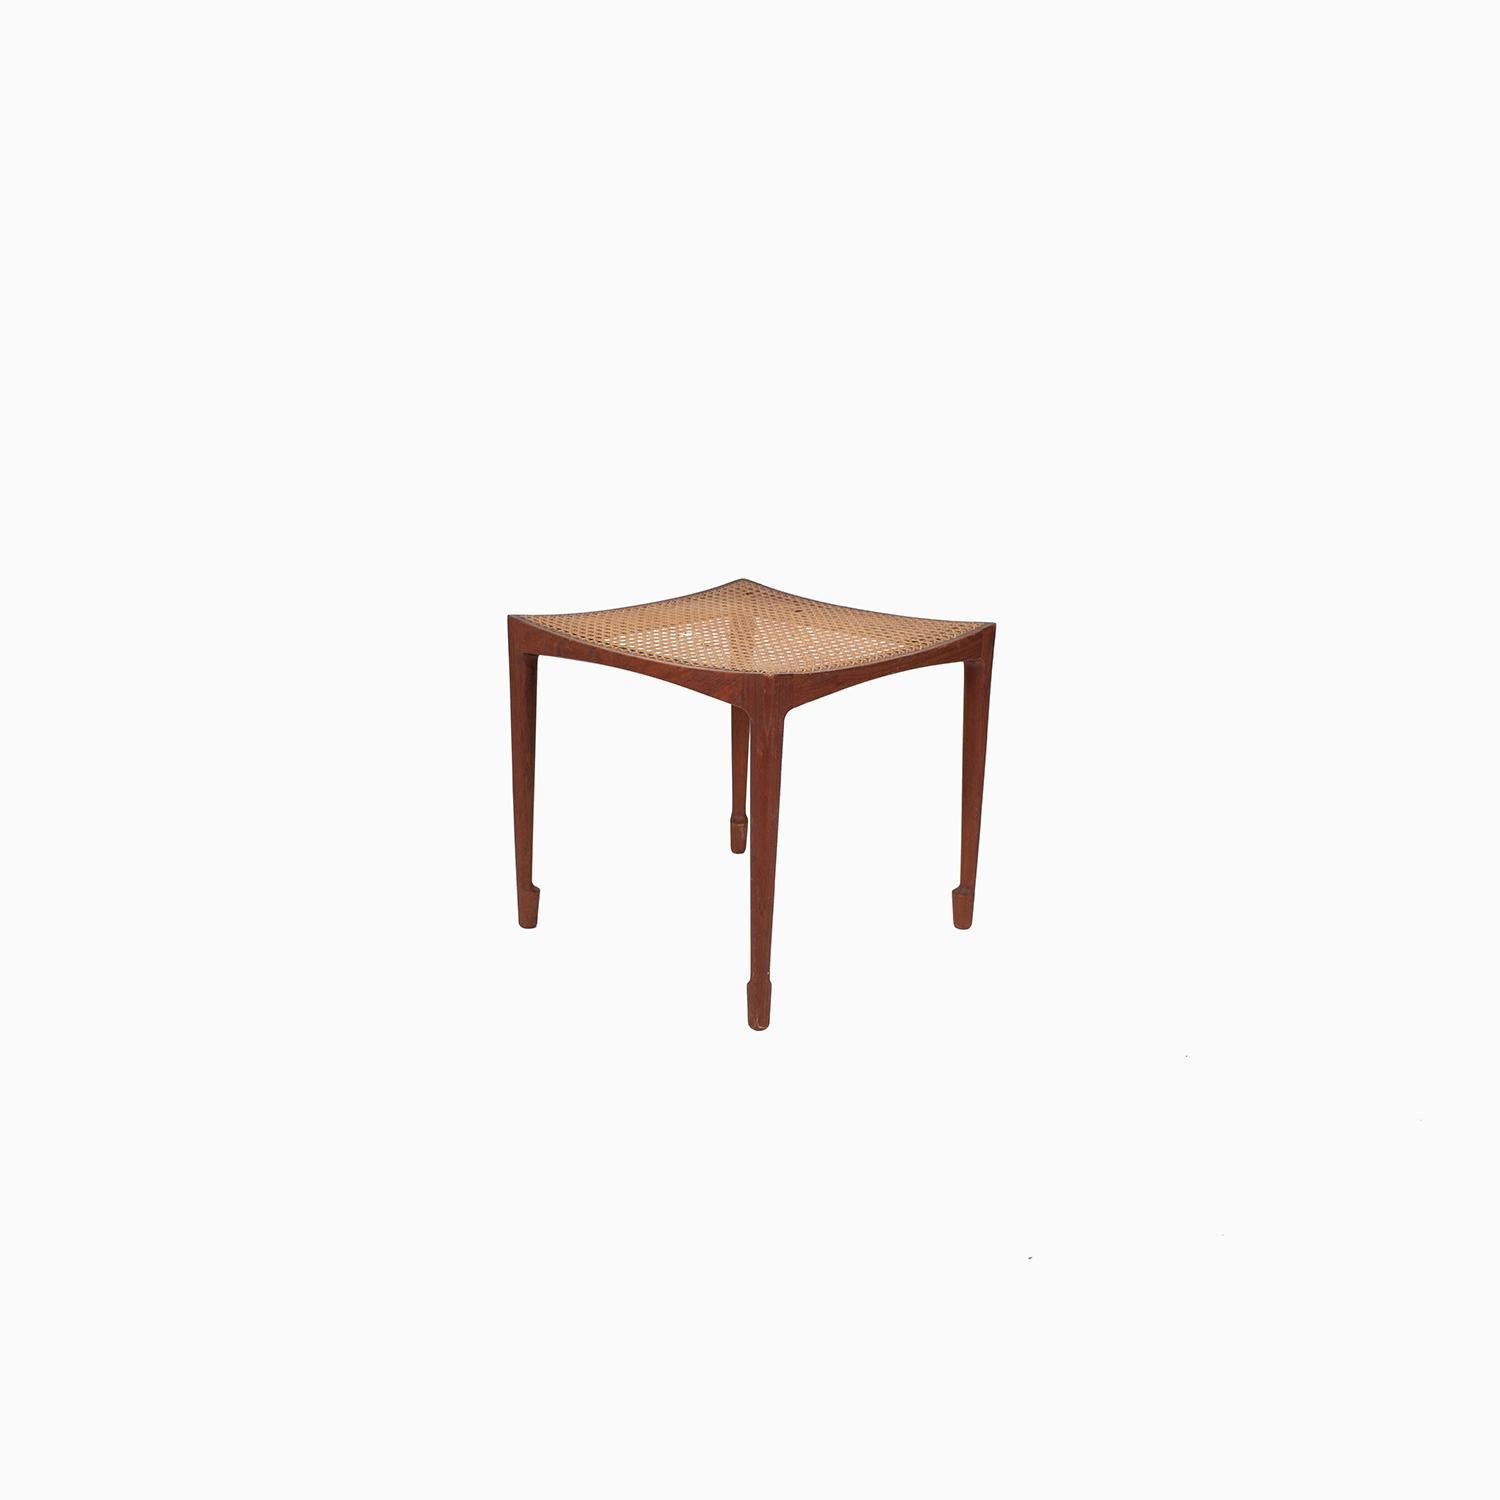 Danish Modern Bernt Petersen Caned Stool In Good Condition For Sale In Minneapolis, MN